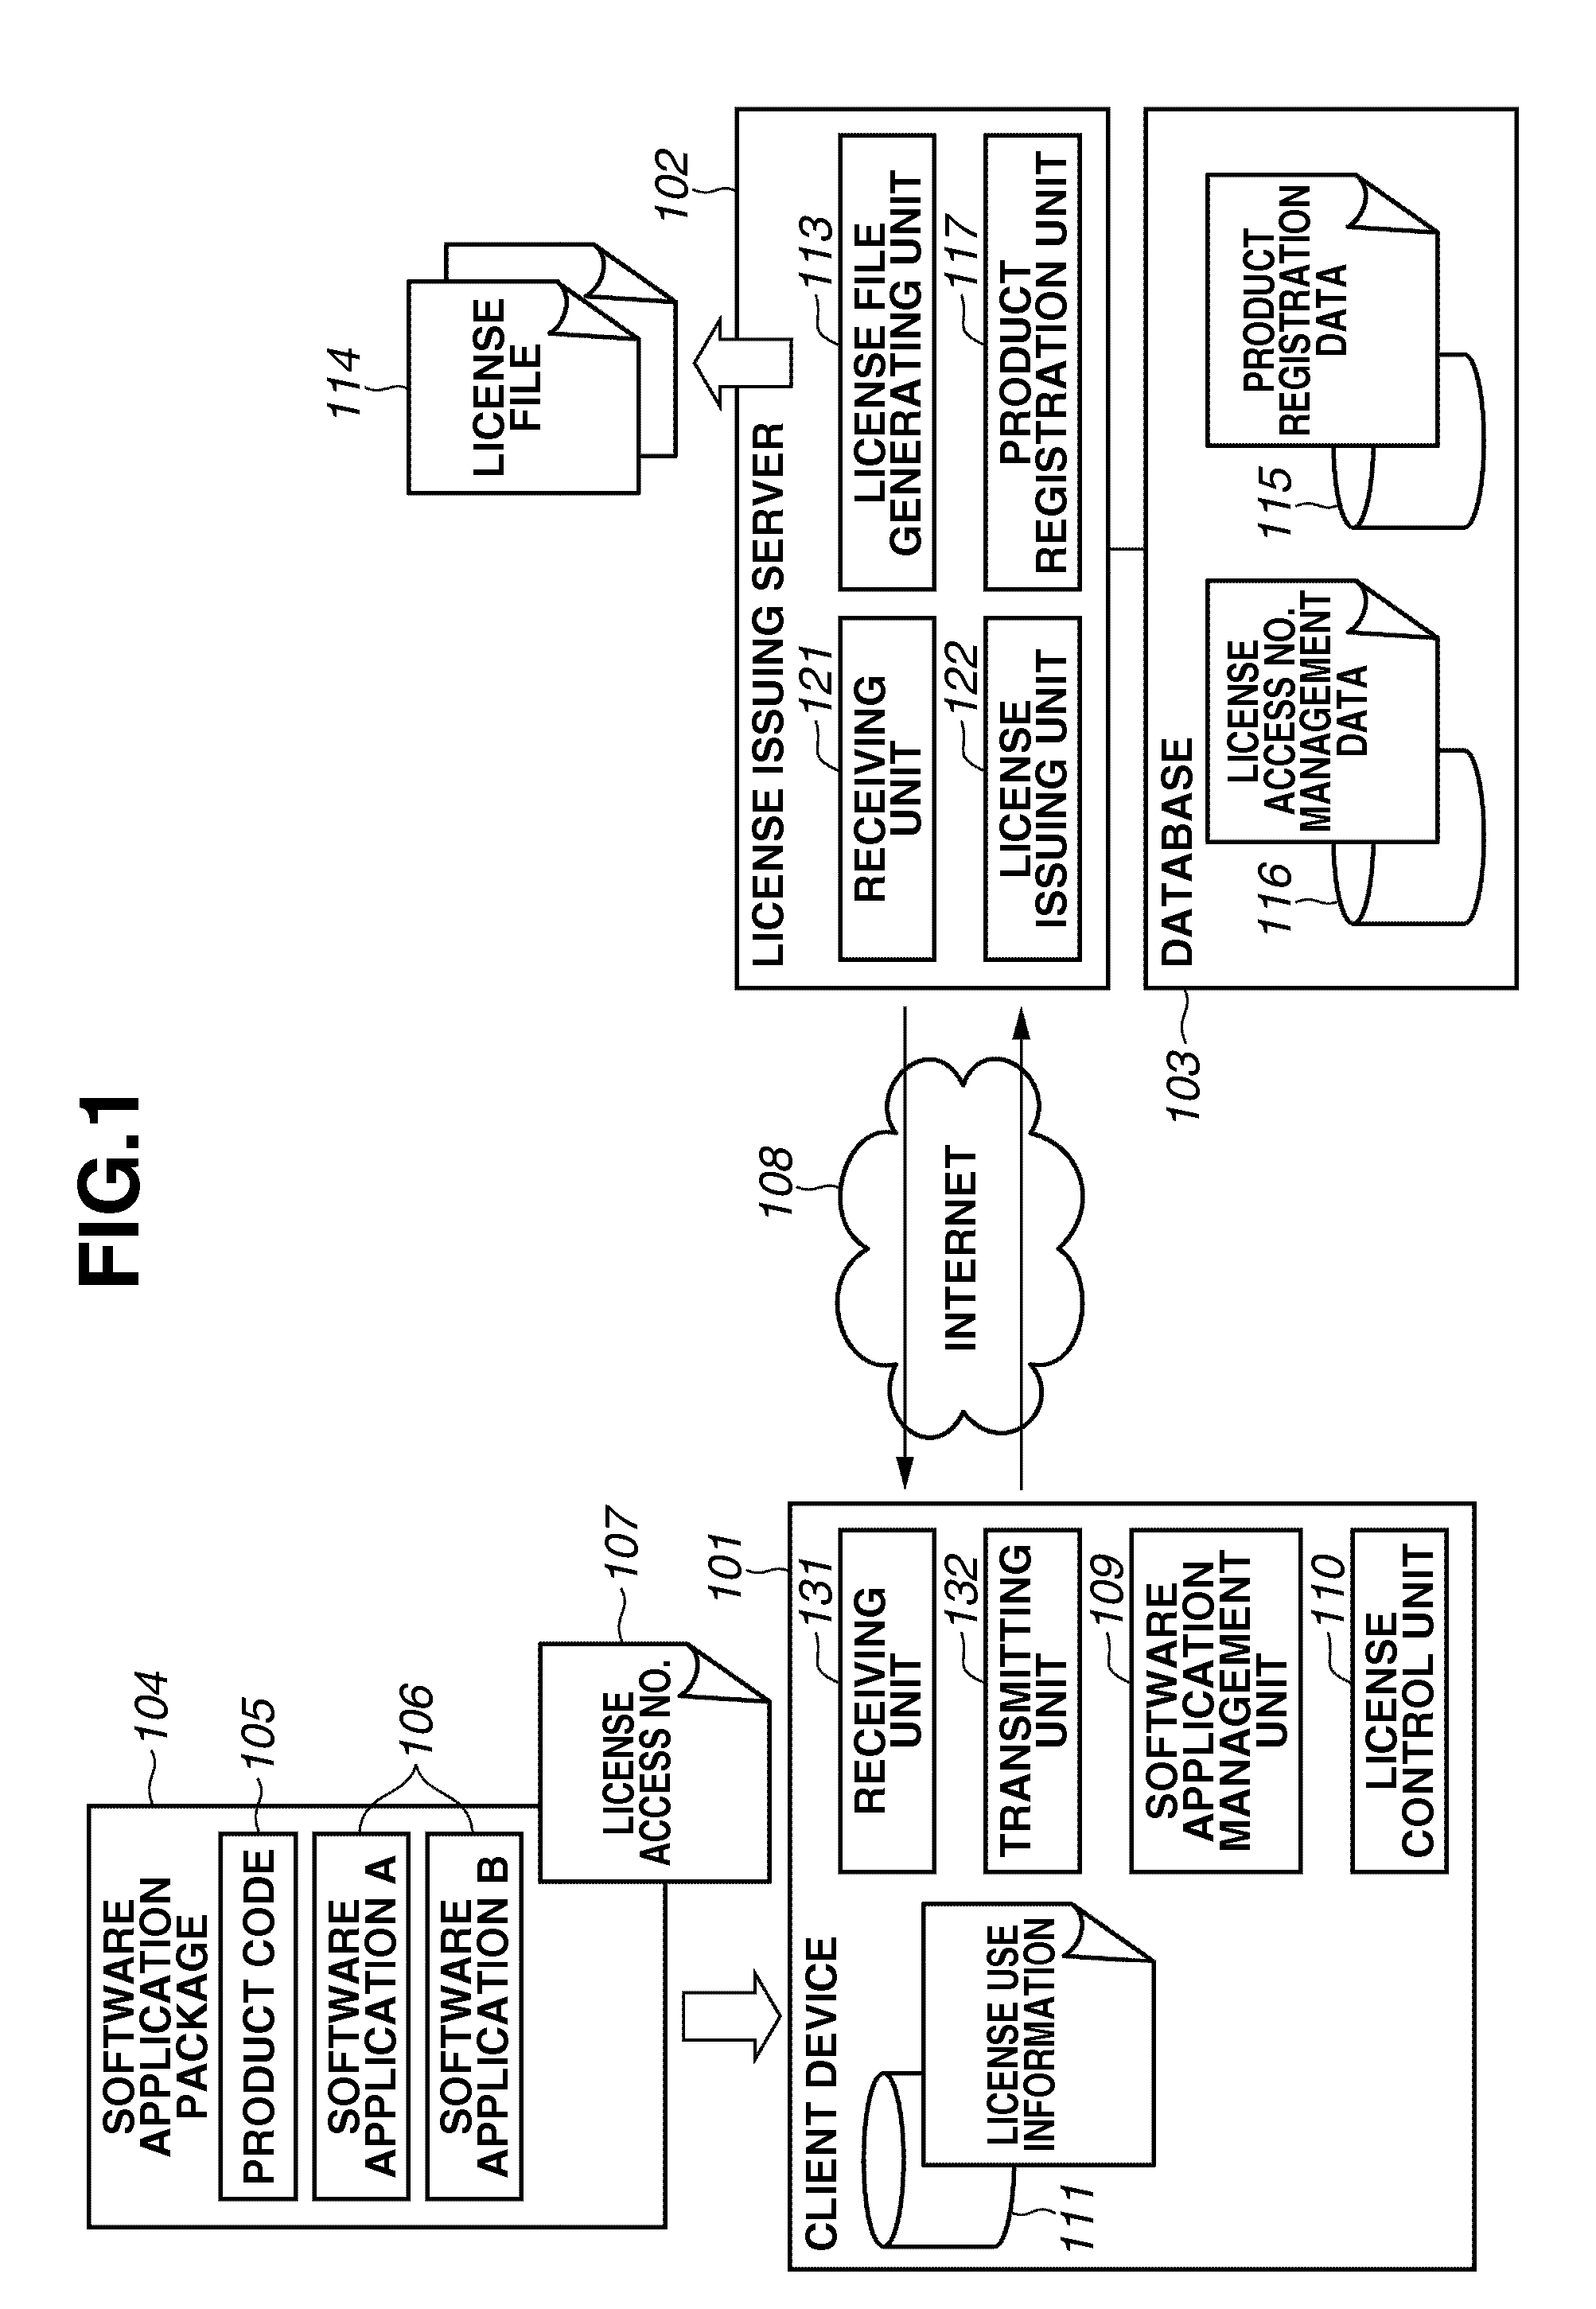 Information processing apparatus, client device, and license management system